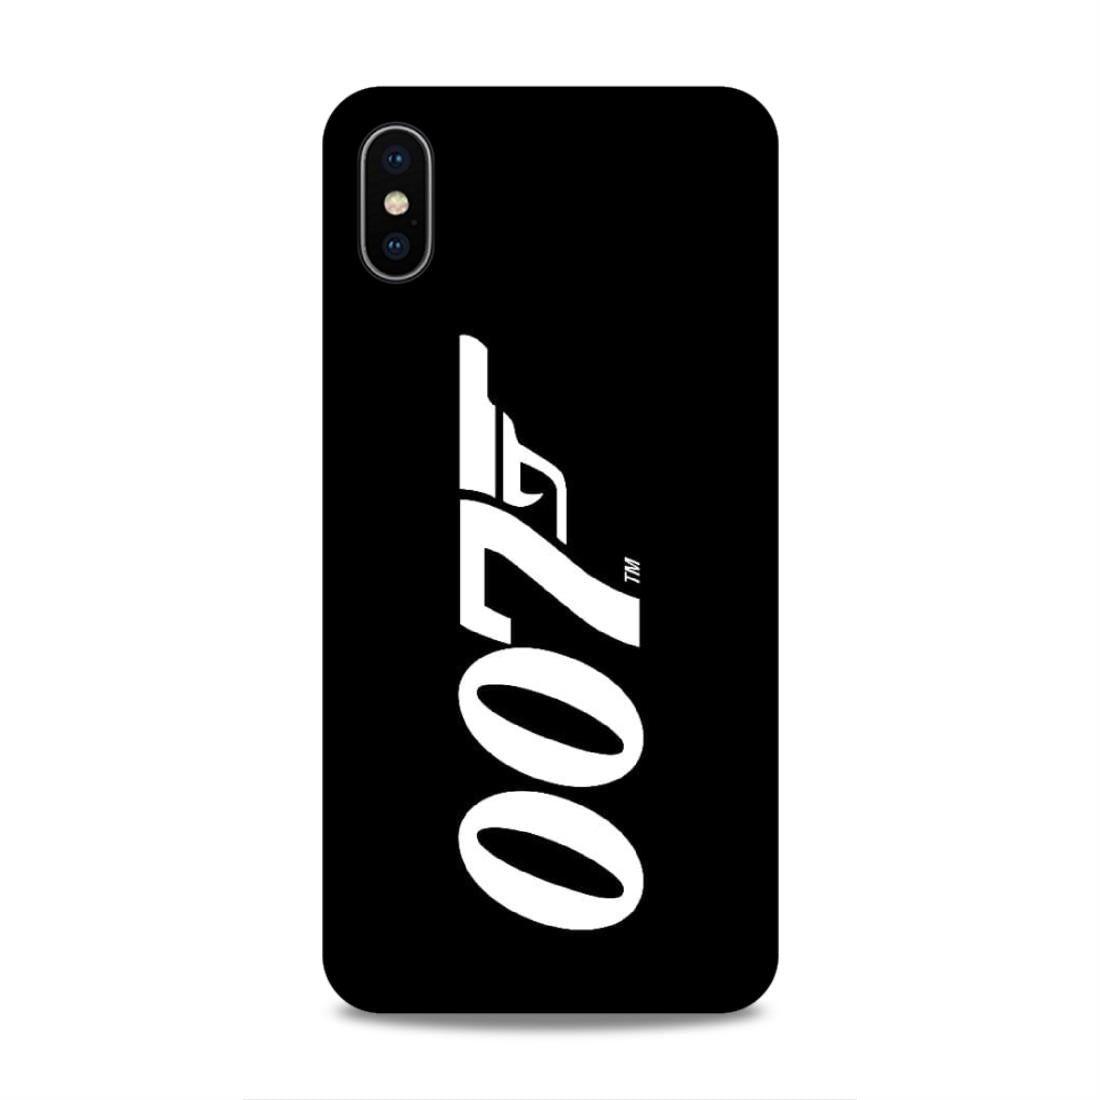 Jems Bond 007 Hard Back Case For Apple iPhone XS Max